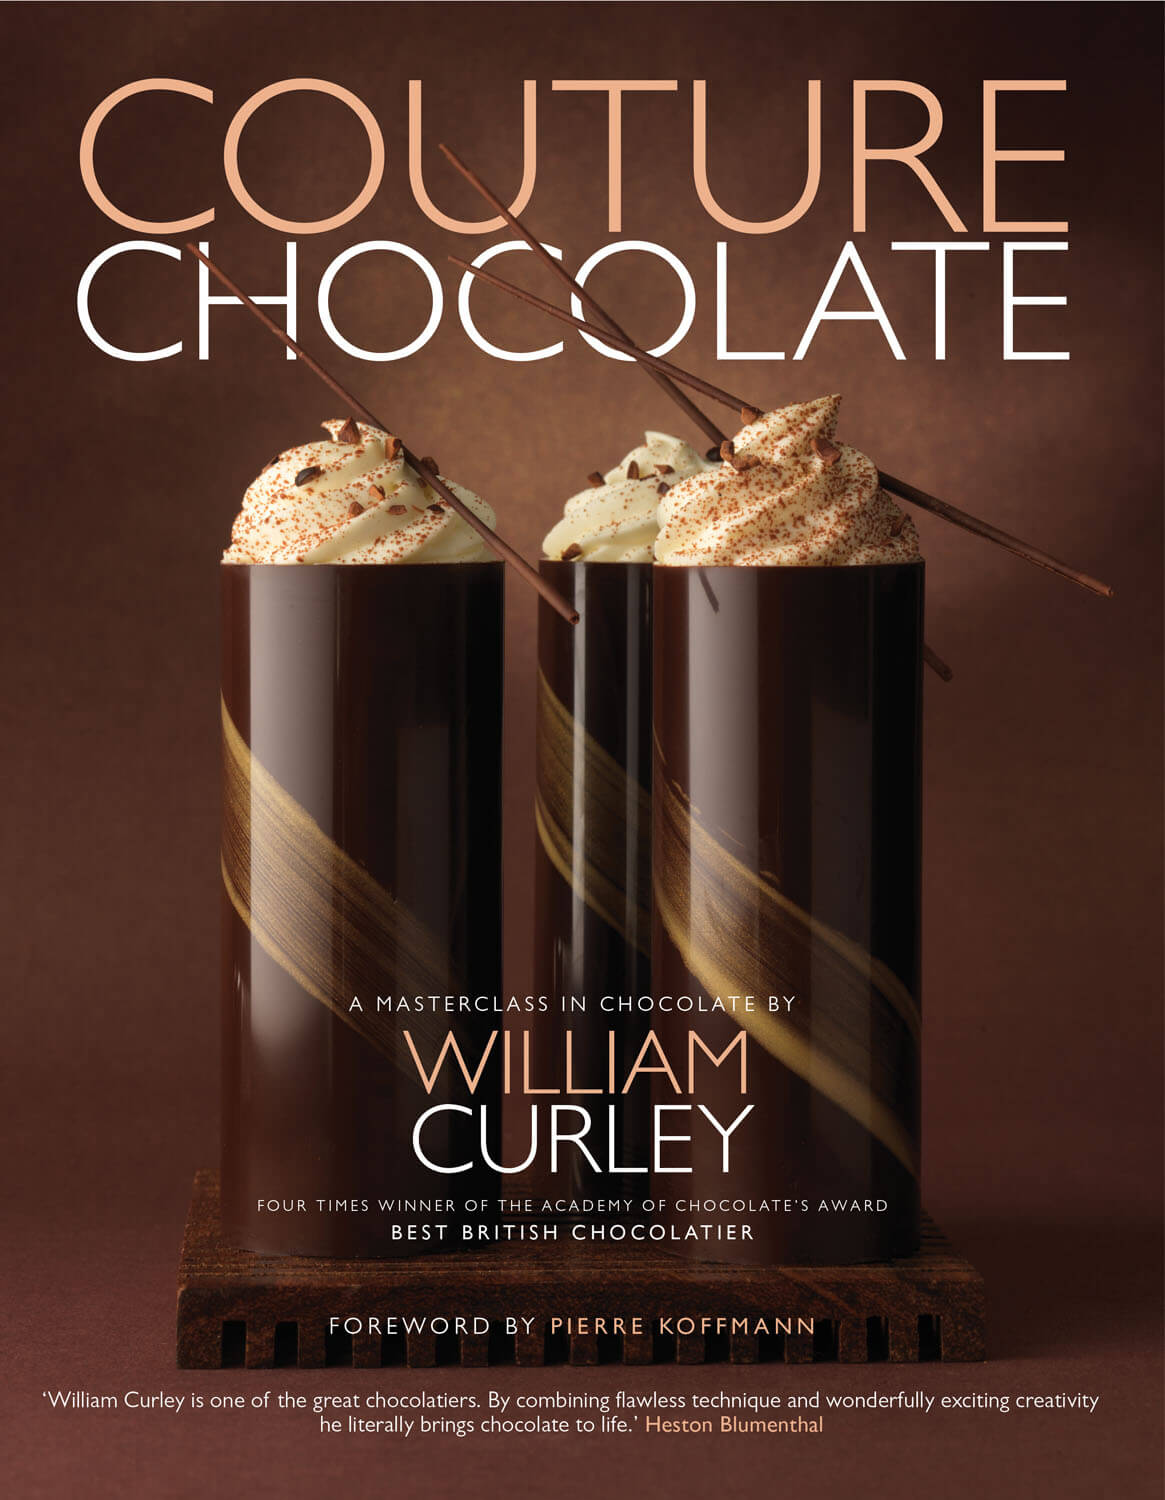 Winners: Kit Kat Chunky Super-Stash and William Curley Couture Chocolate